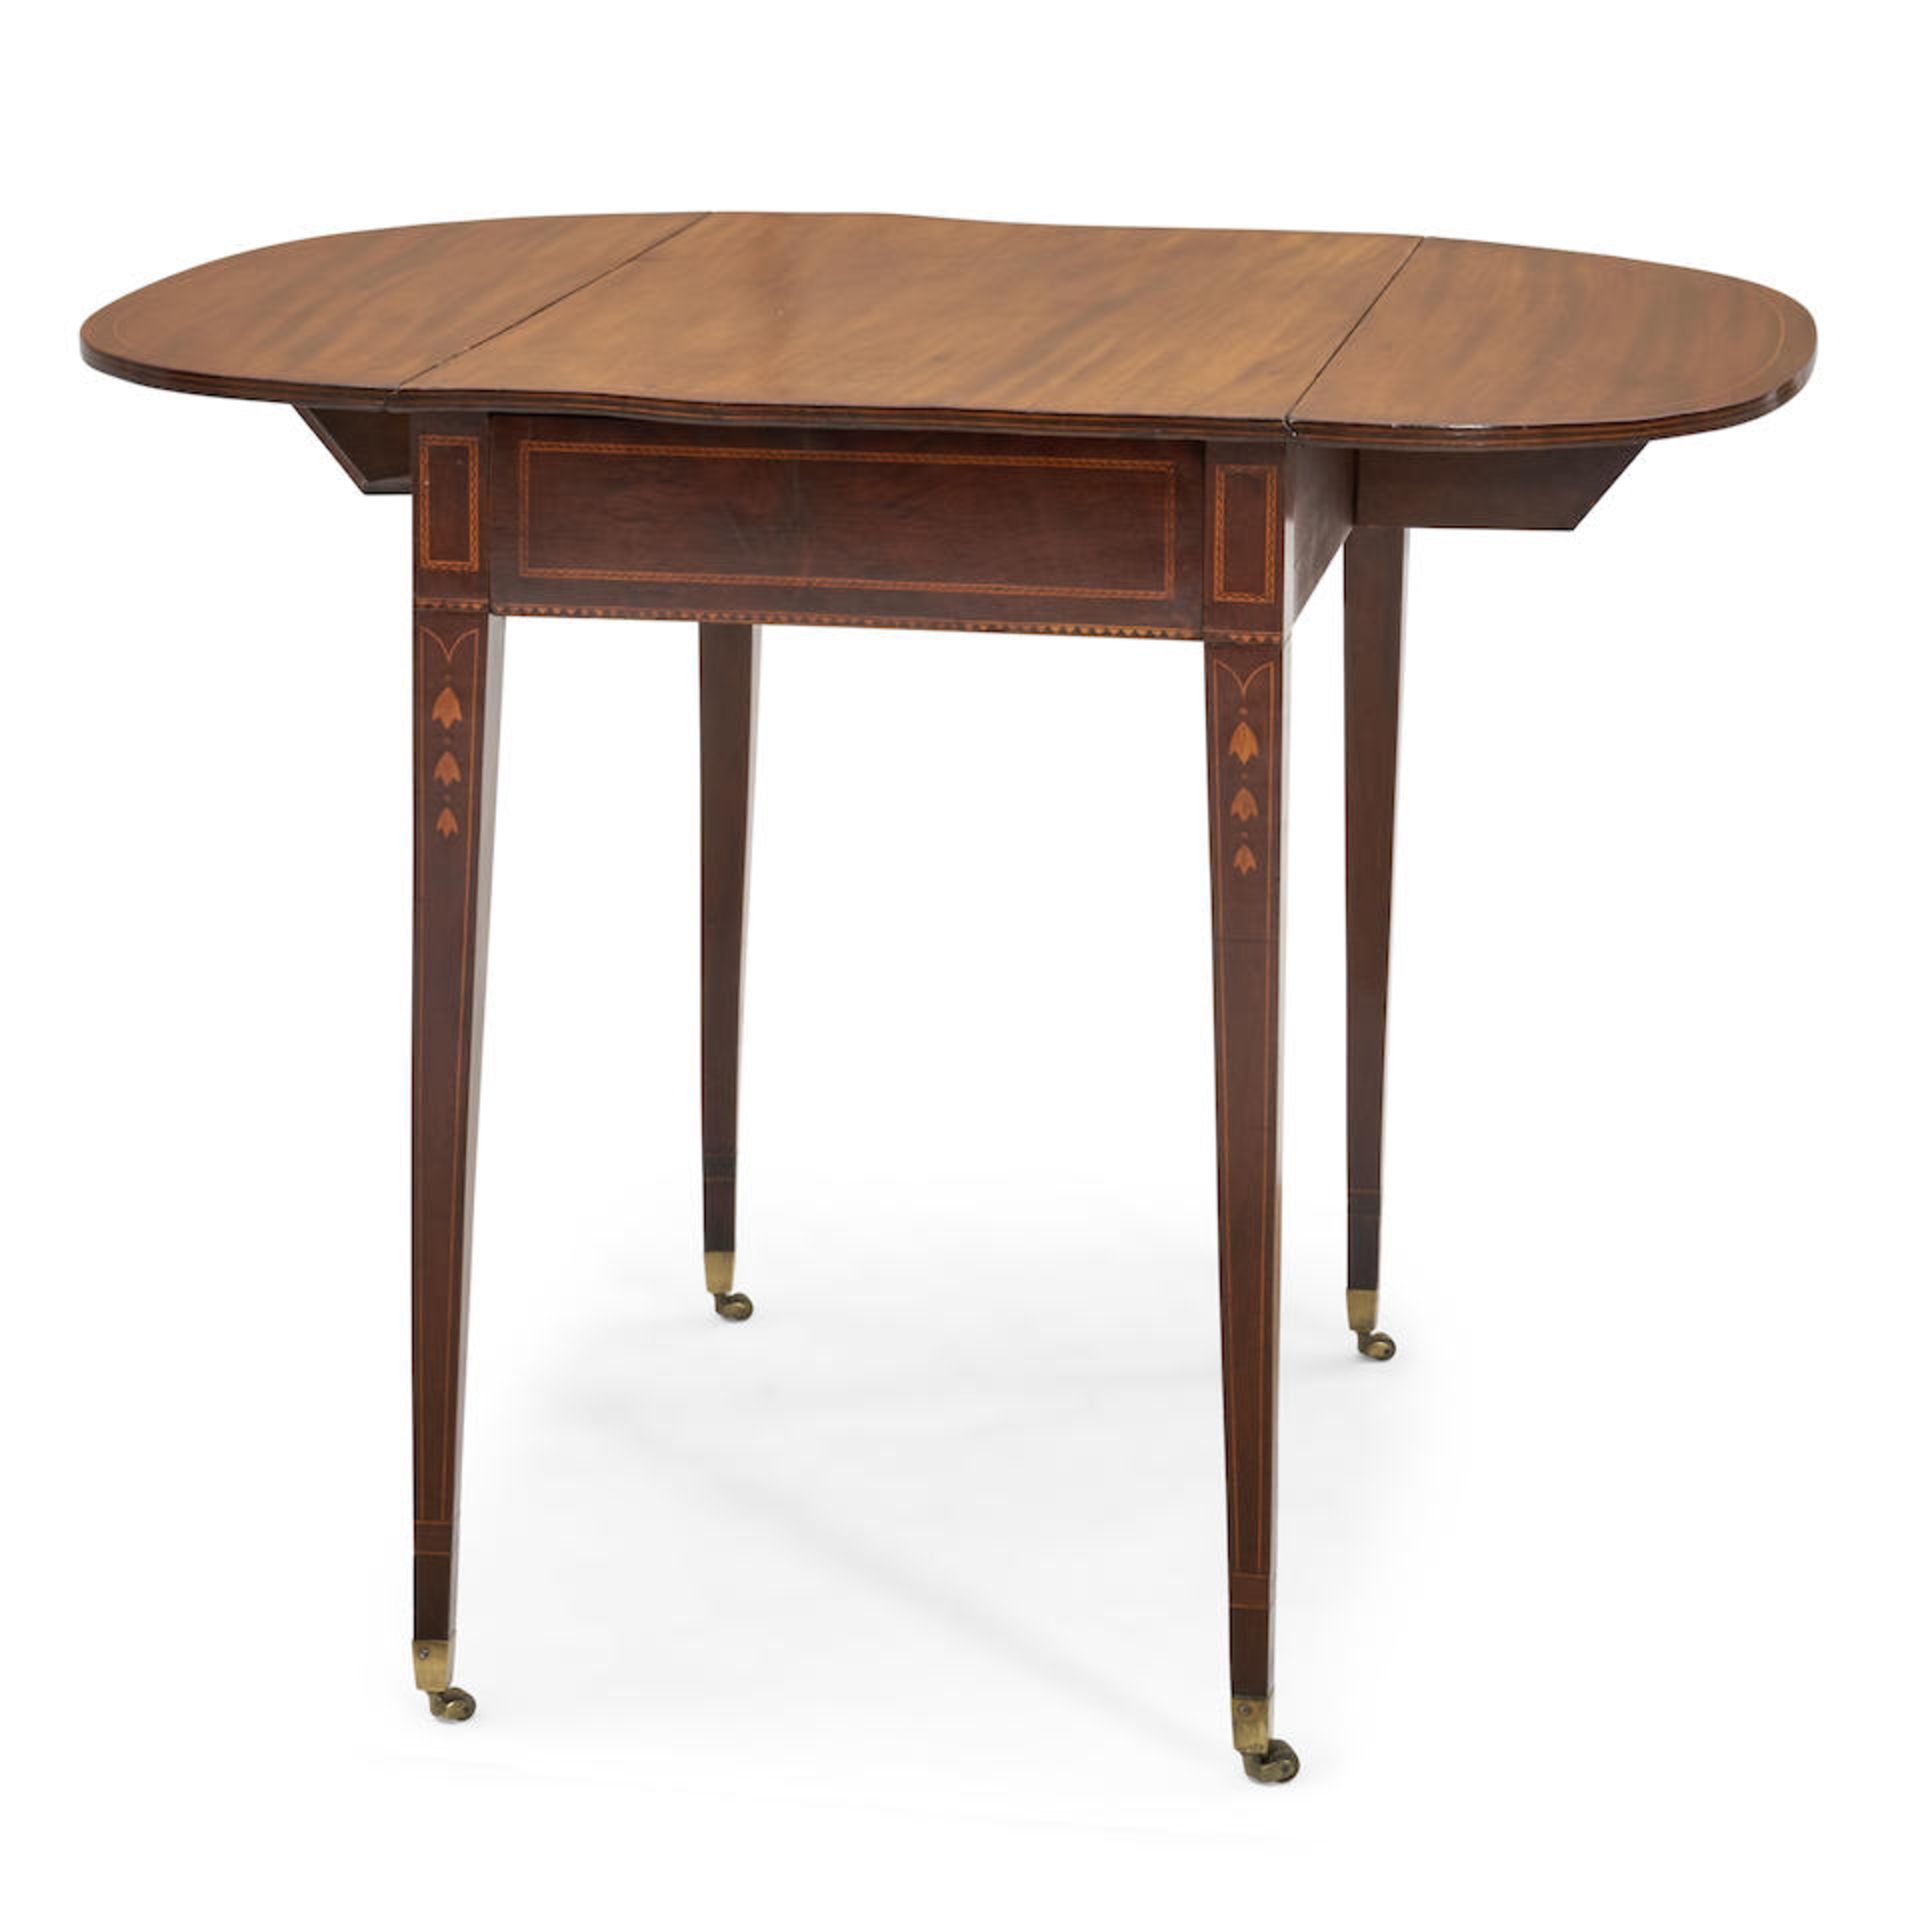 Federal Inlaid Mahogany and White Pine Pembroke Table, Rhode Island, 1790-1815.